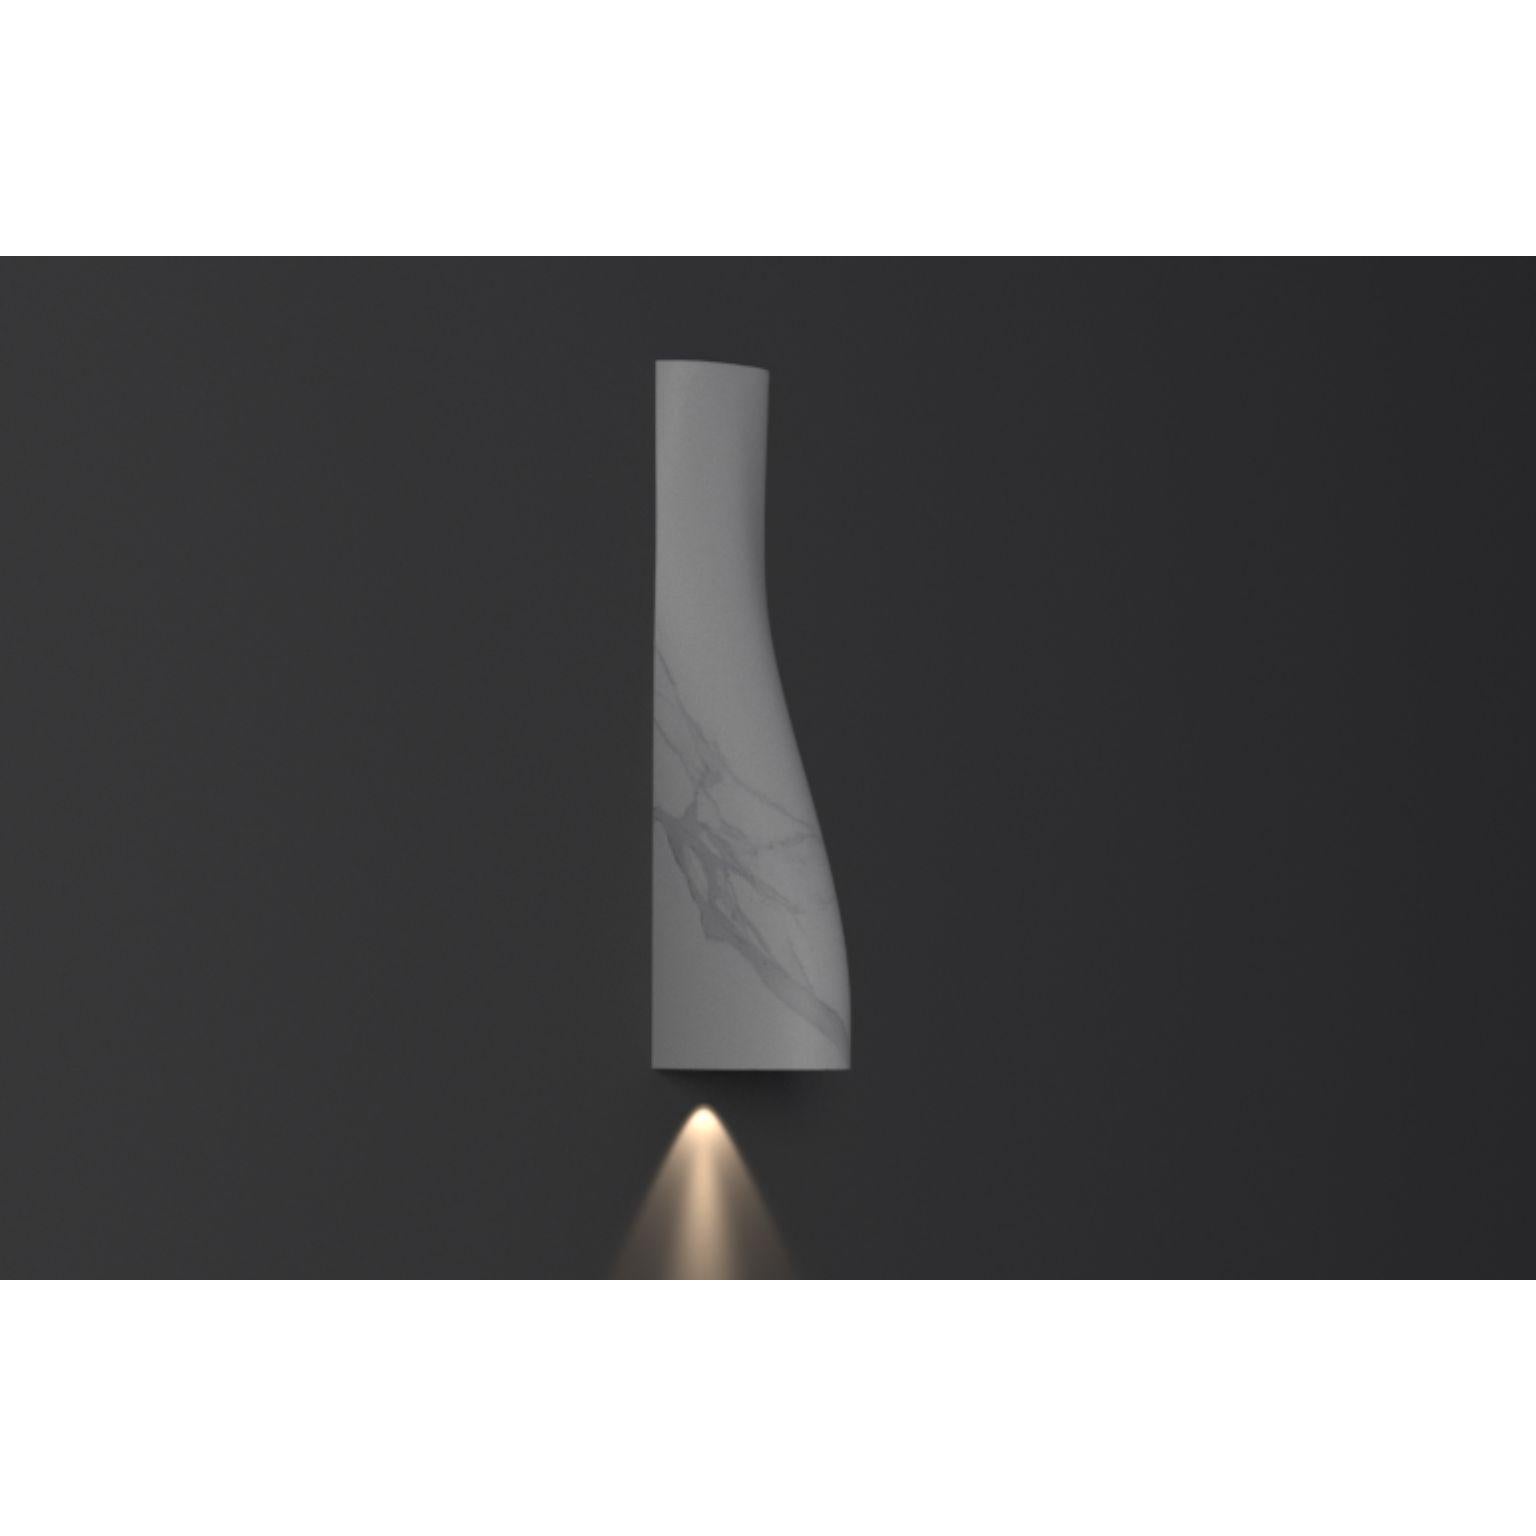 Ula Sculpture White Sconce by Veronica Mar
Dimensions: D40 x W40 x H60 cm
Materials: Marble
Weight: 90 kg.
Numbered and Limited Edition

ULA SCULPTURE Sconce can be a bespoke piece. Custom Dimensions and type of marble Available Upon